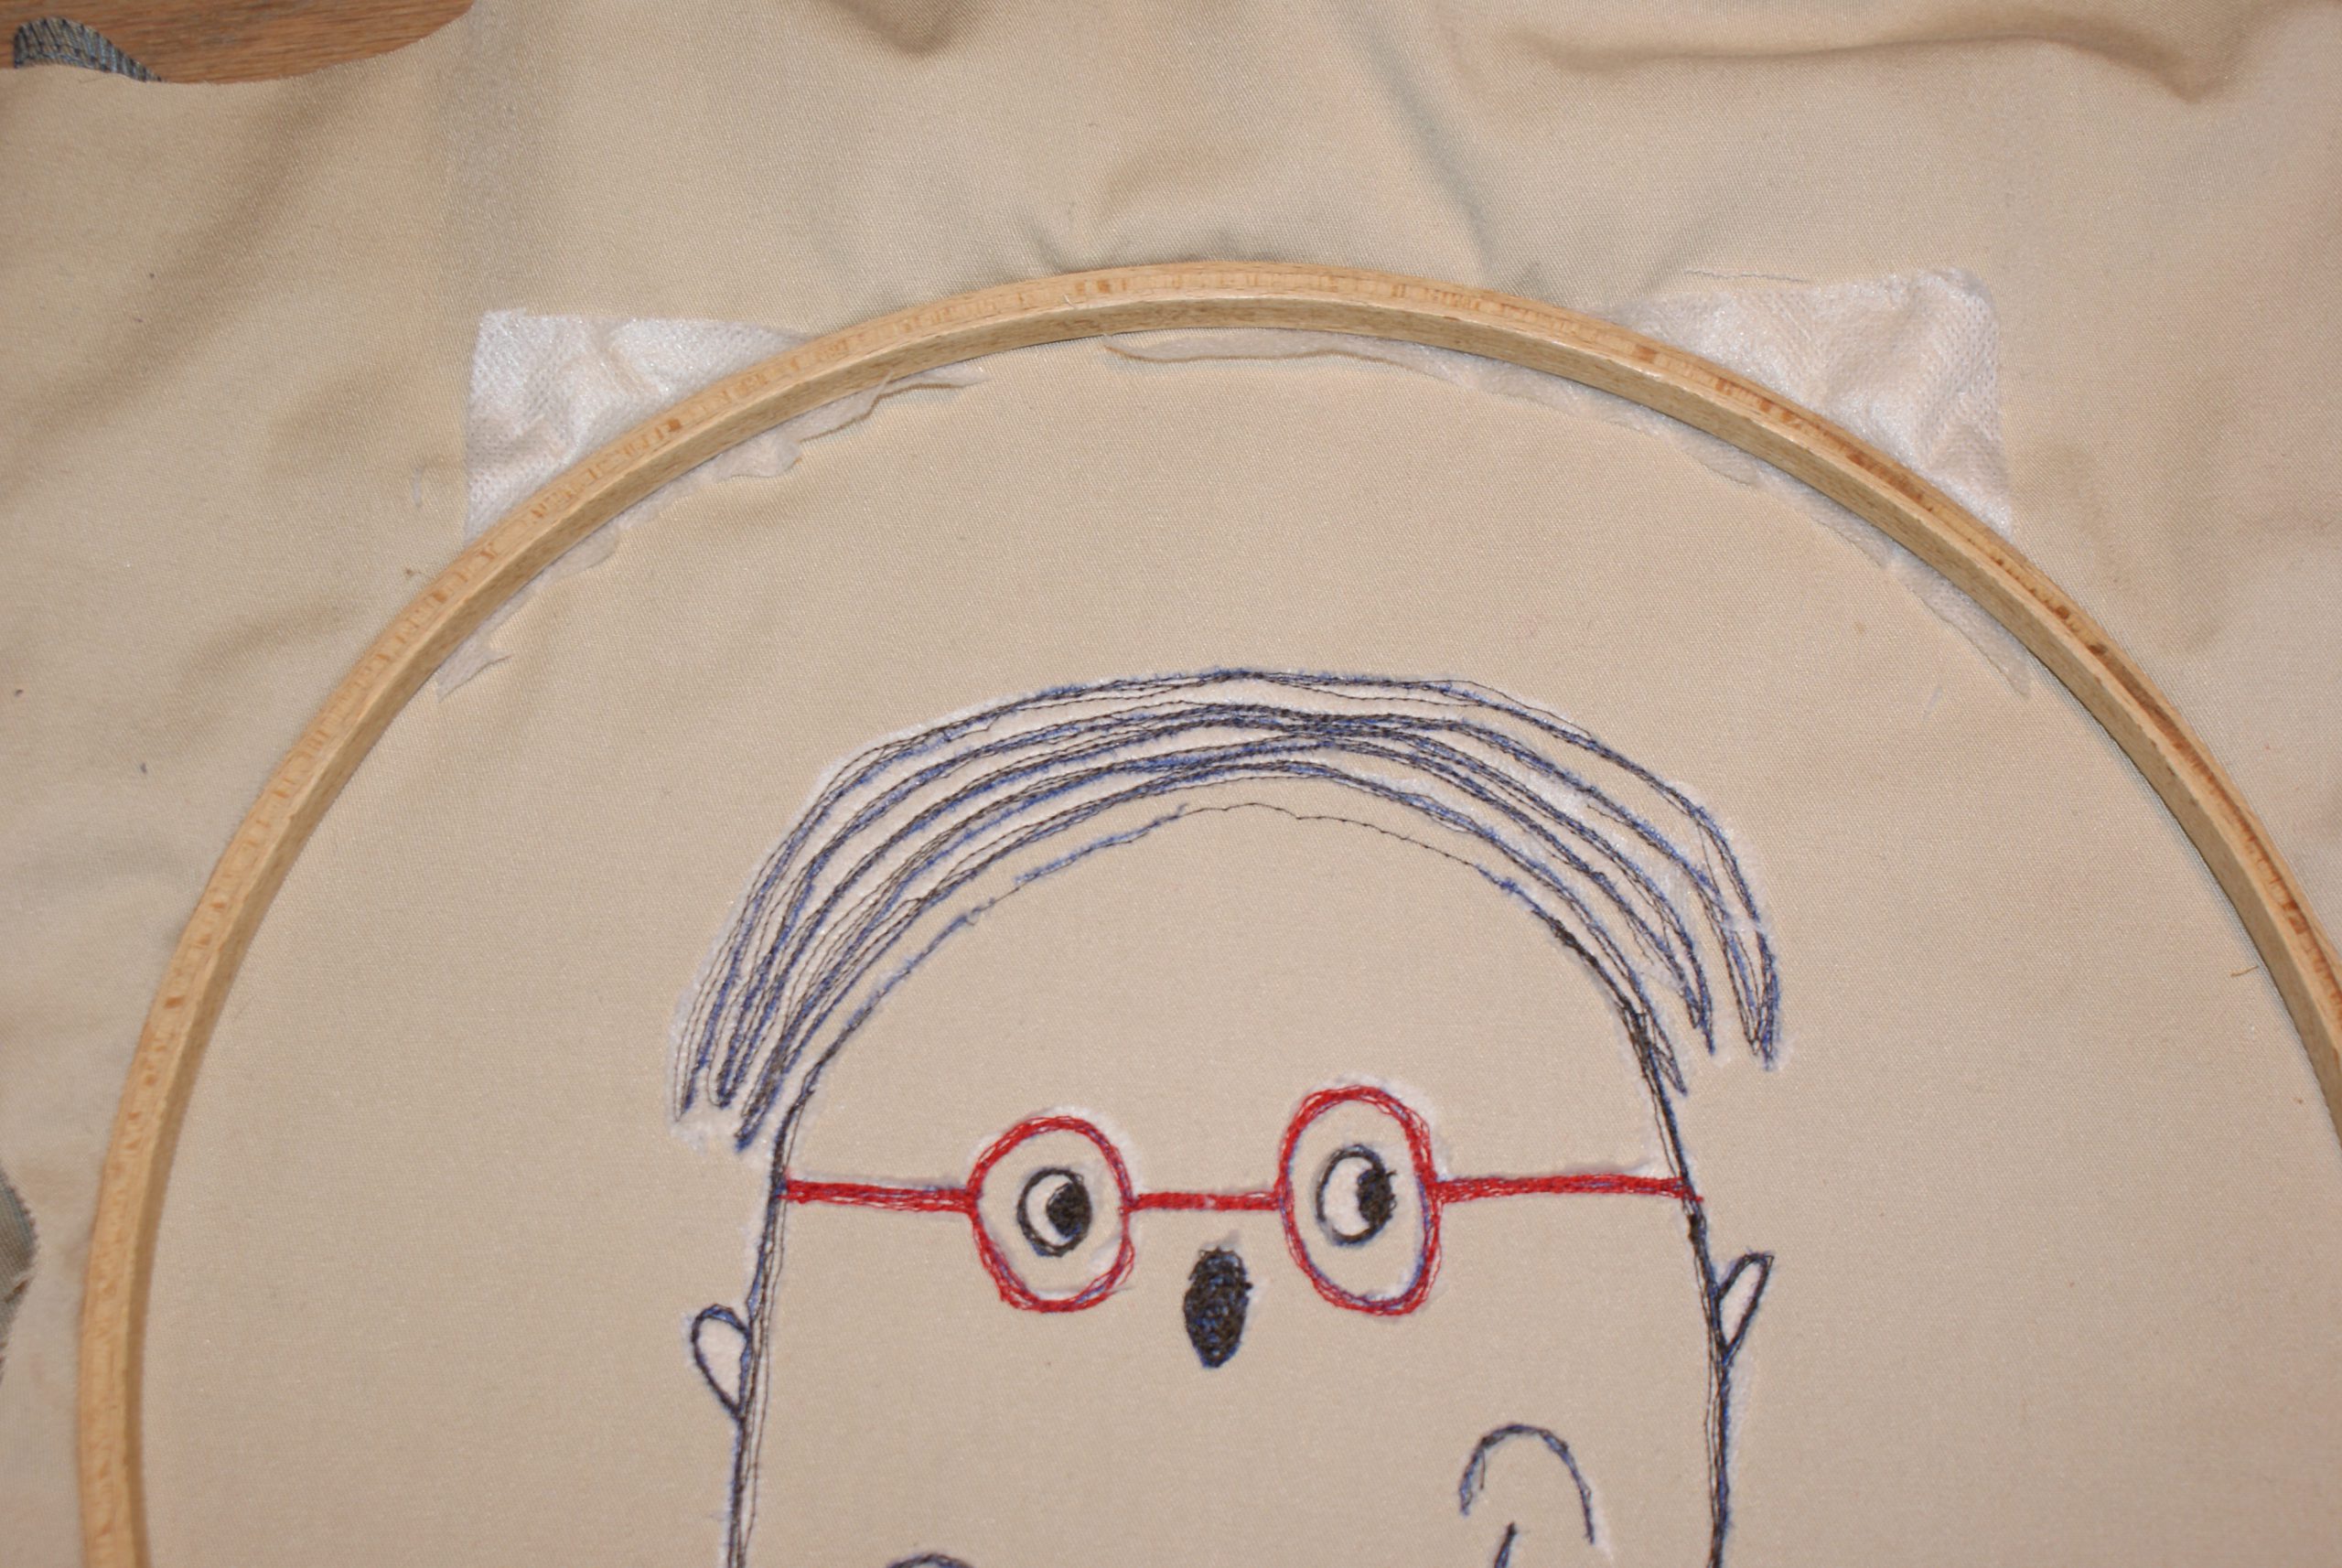 Decorate a cushion with a children's drawing